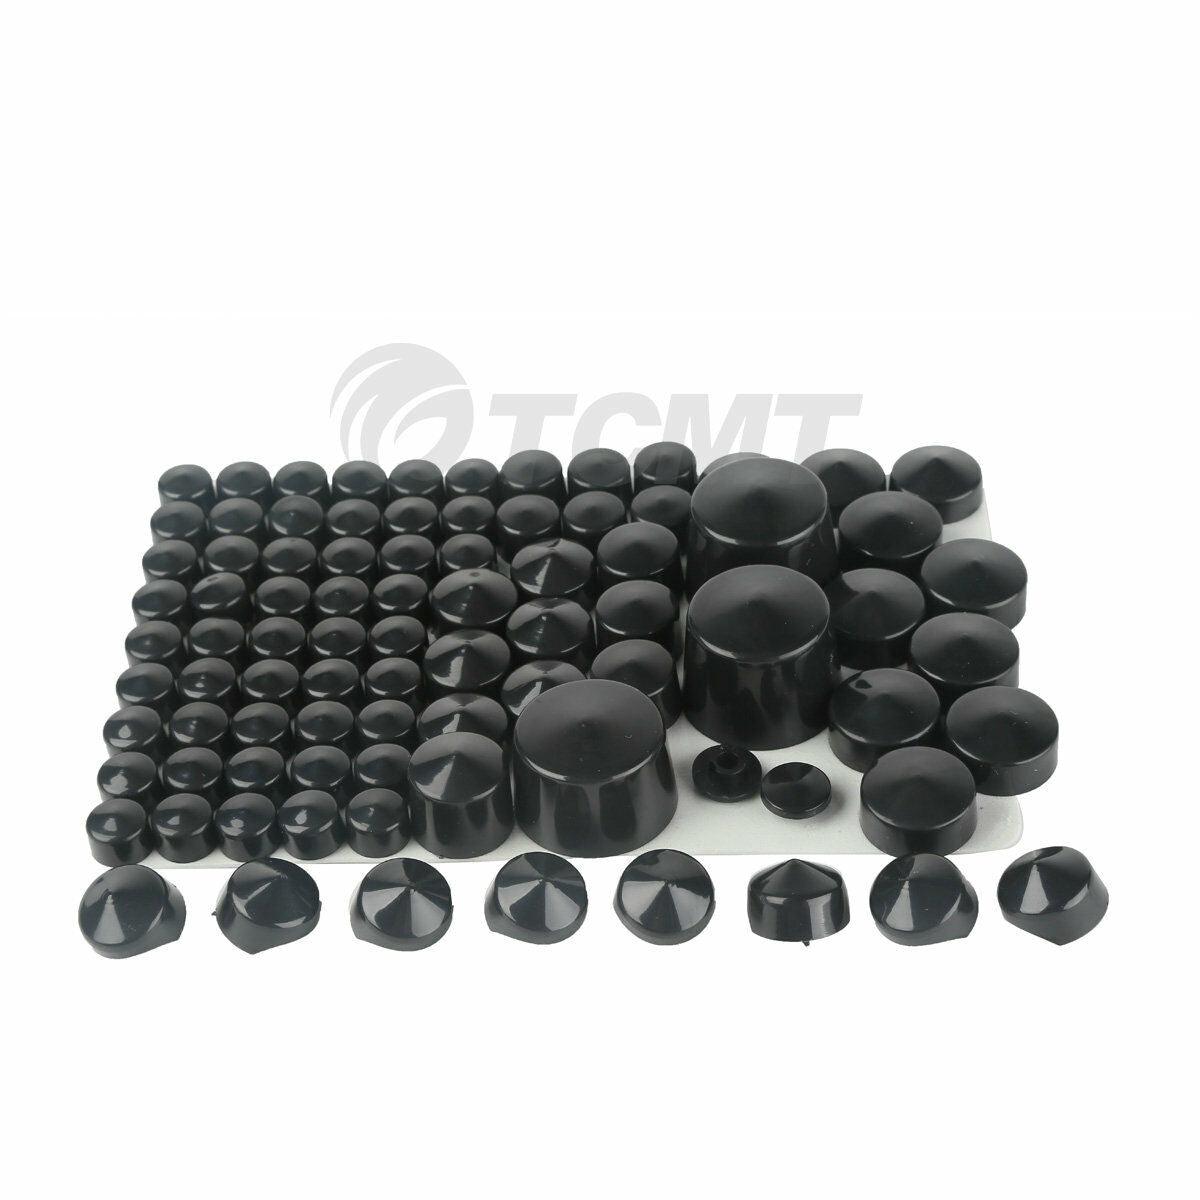 ABS Black 87Pcs Bolt Toppers Caps Cover For Harley Softail Twin Cam 84-06 05 04 - Moto Life Products